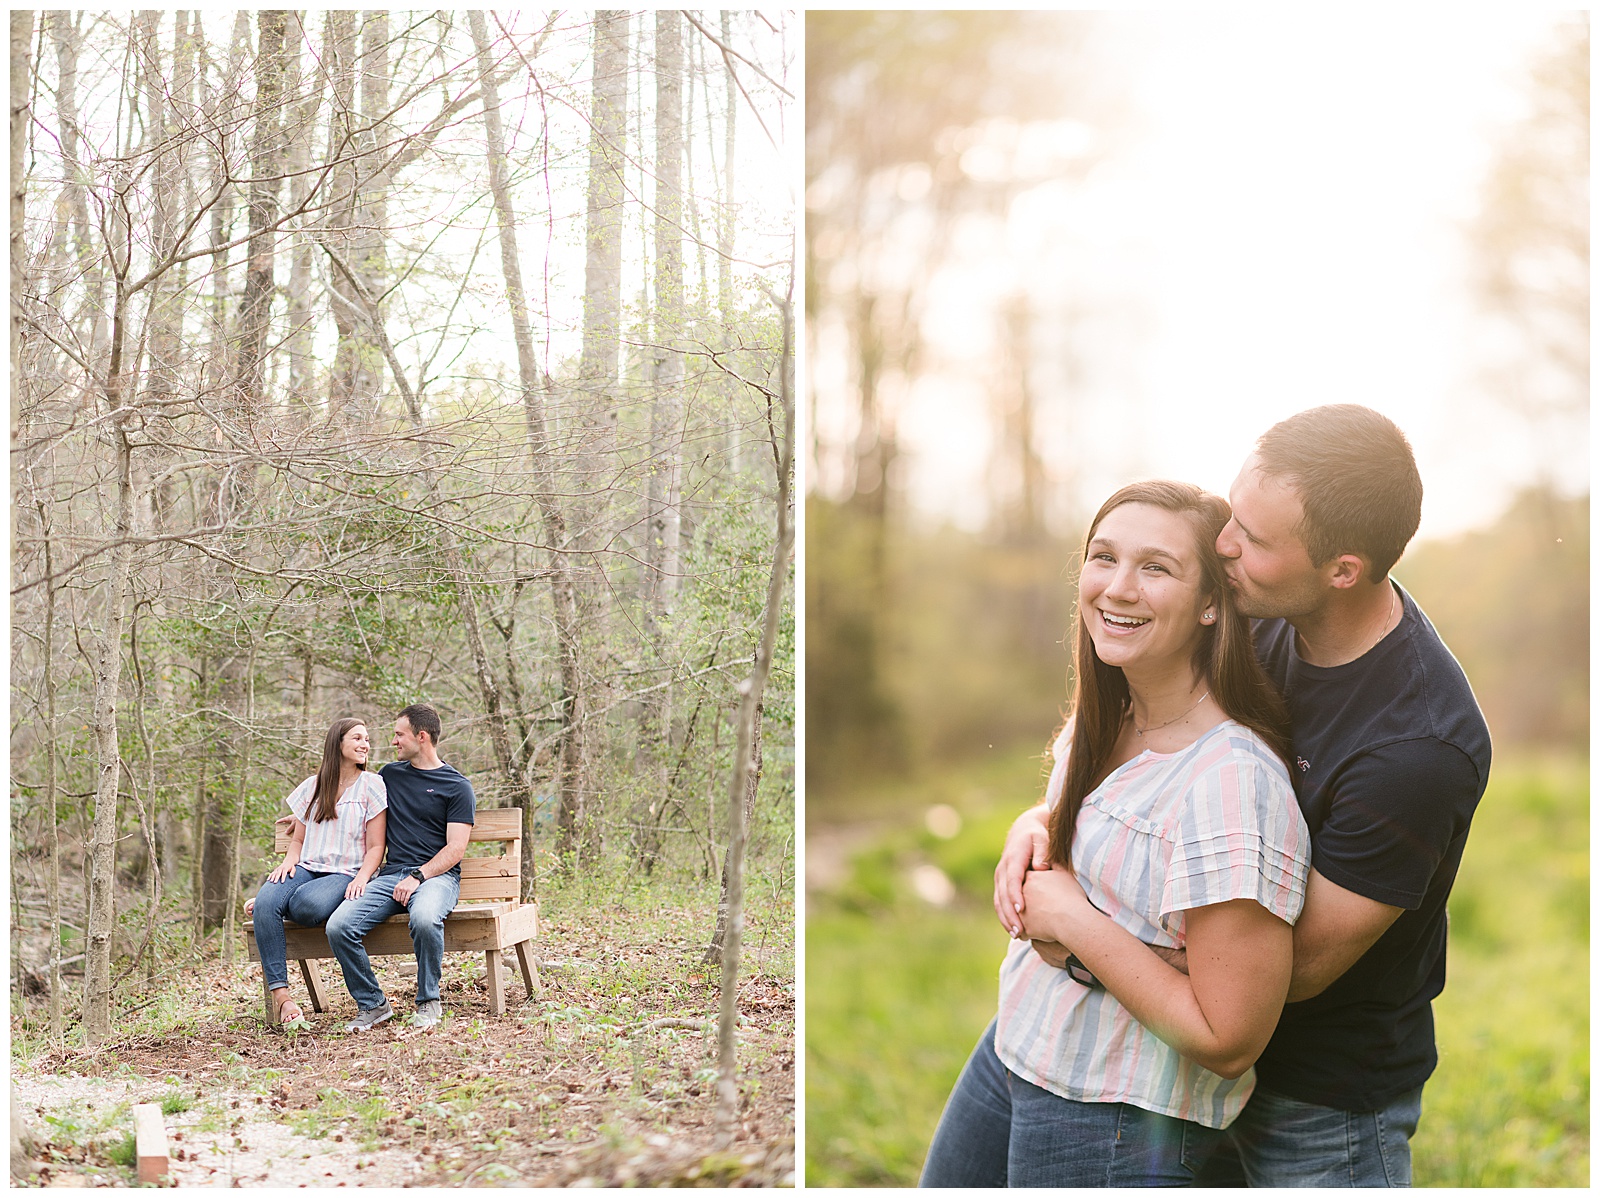 Engaged Couple photographed at sunset by silverbridge & Co